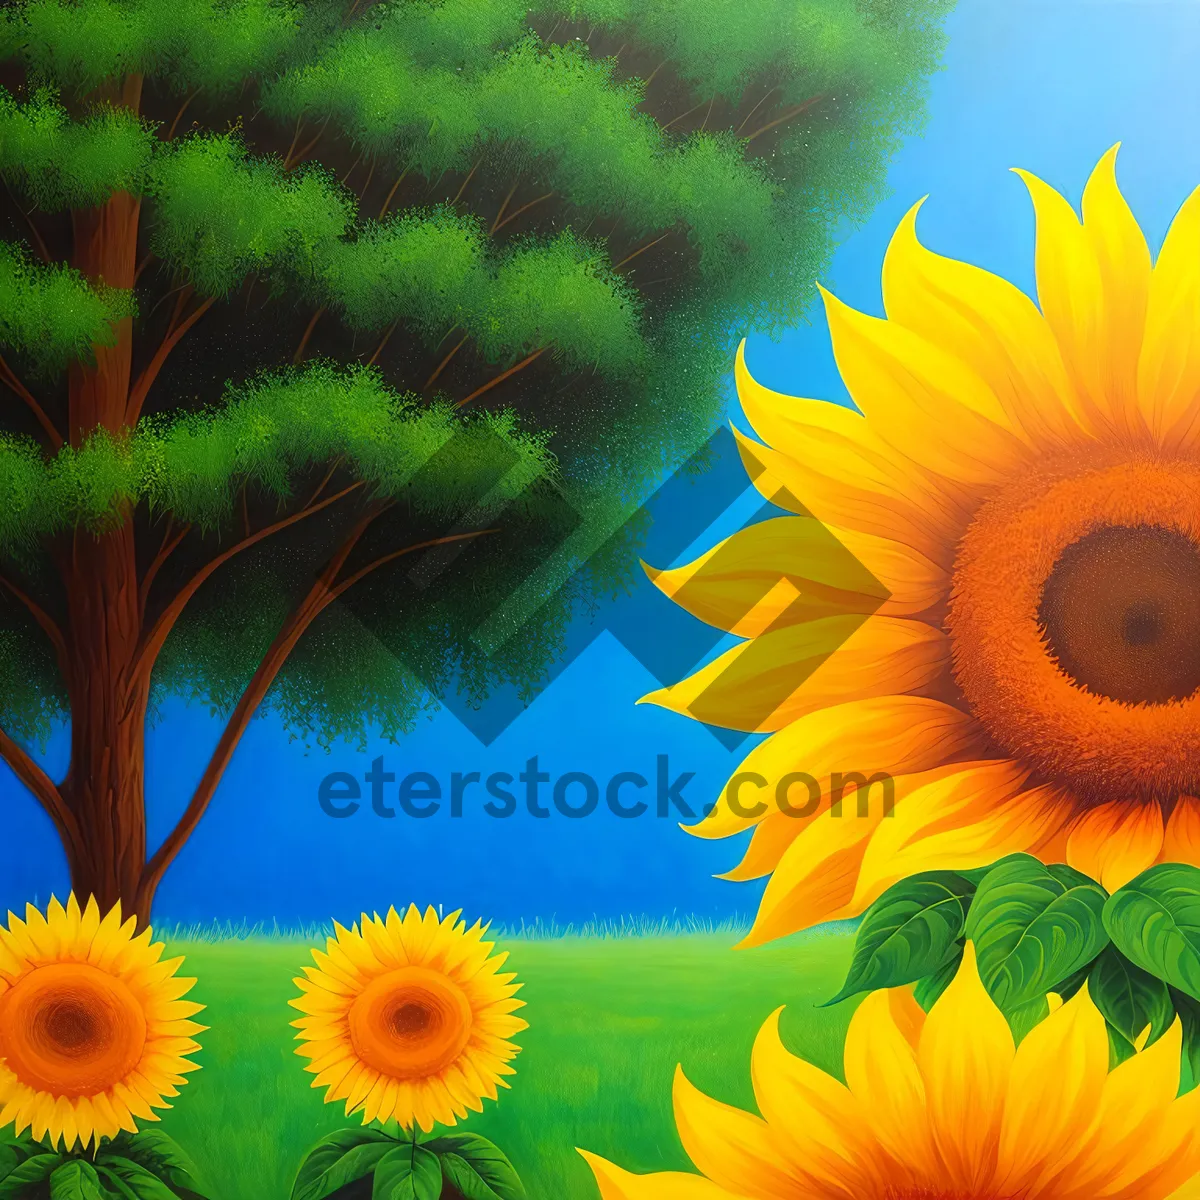 Picture of Bright Yellow Sunflower Blooming in Summer Garden